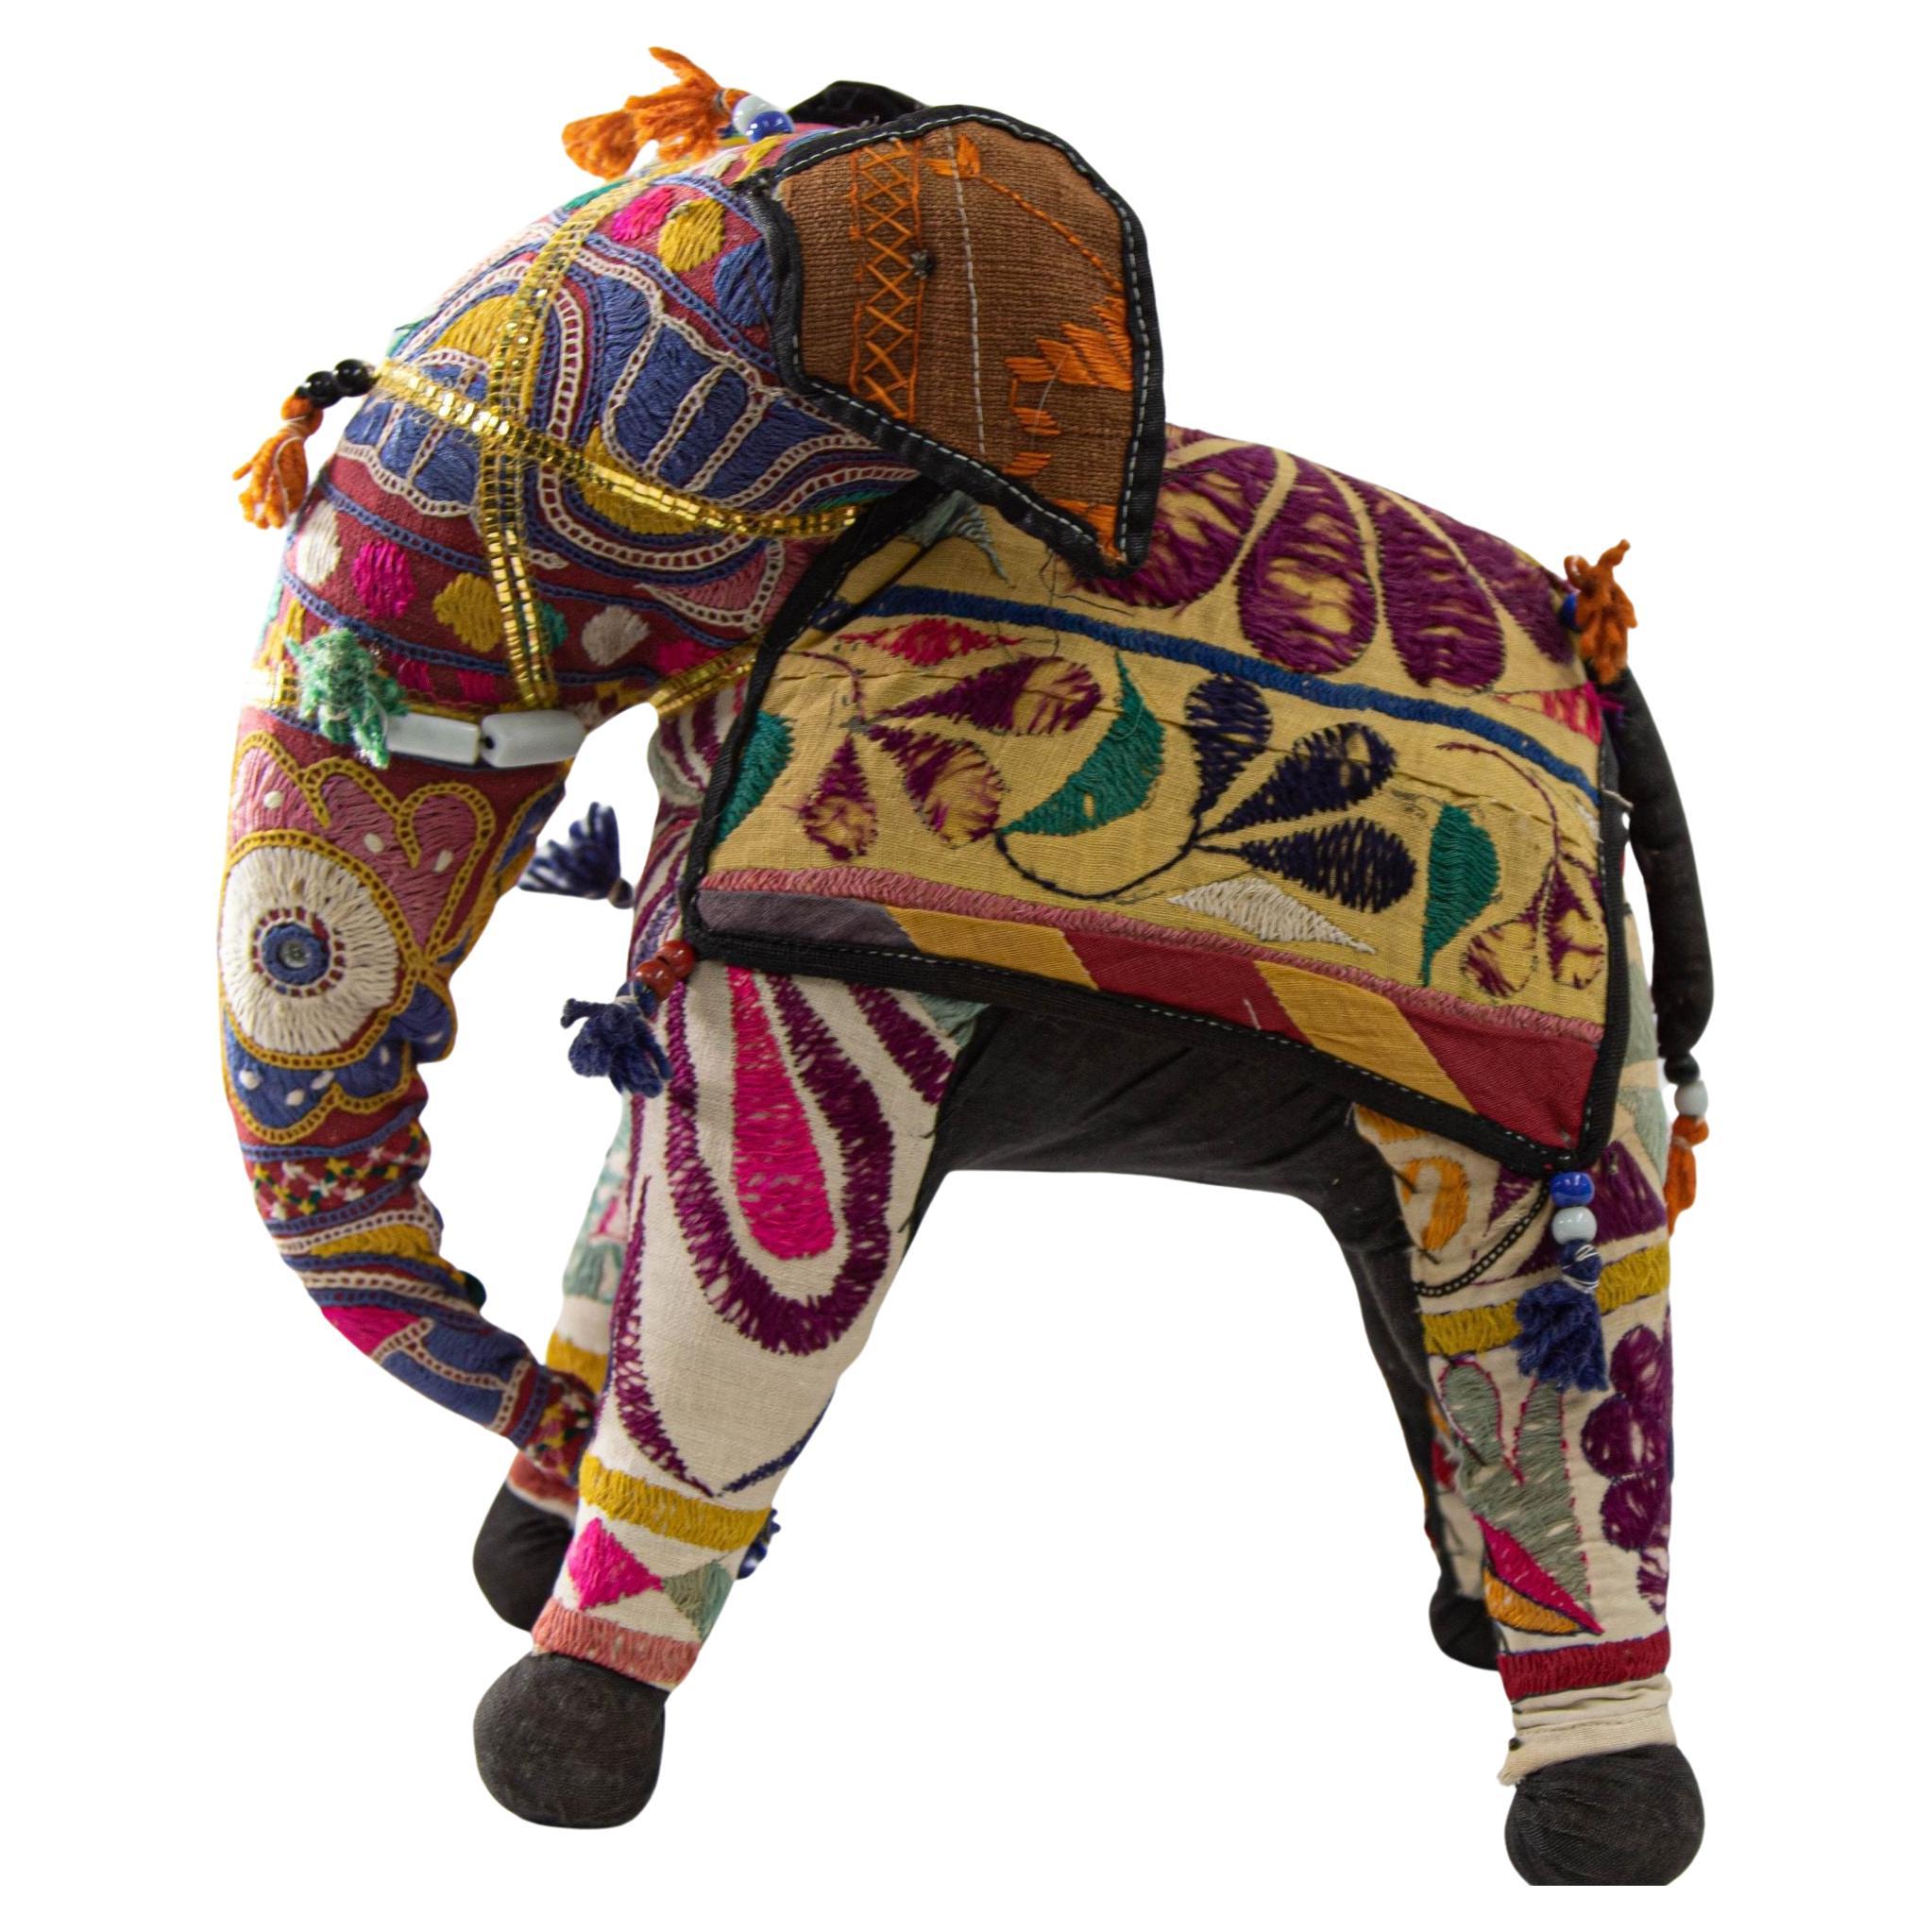 Vintage Handcrafted Stuffed Cotton Embroidered Ceremonial Elephant Toy Raj India en vente